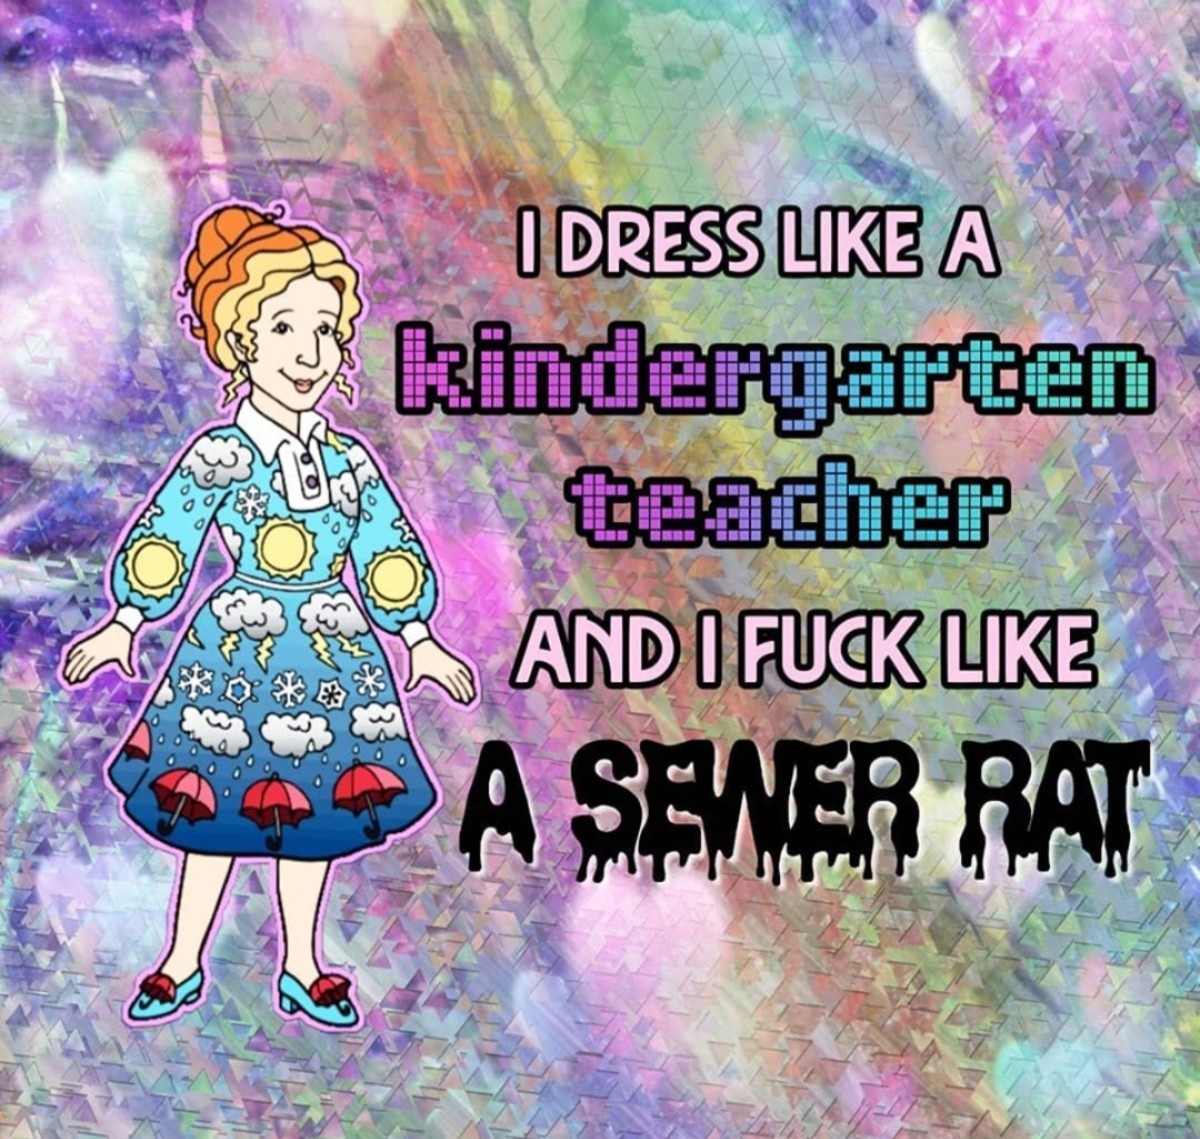 Ms. frizzle quotes